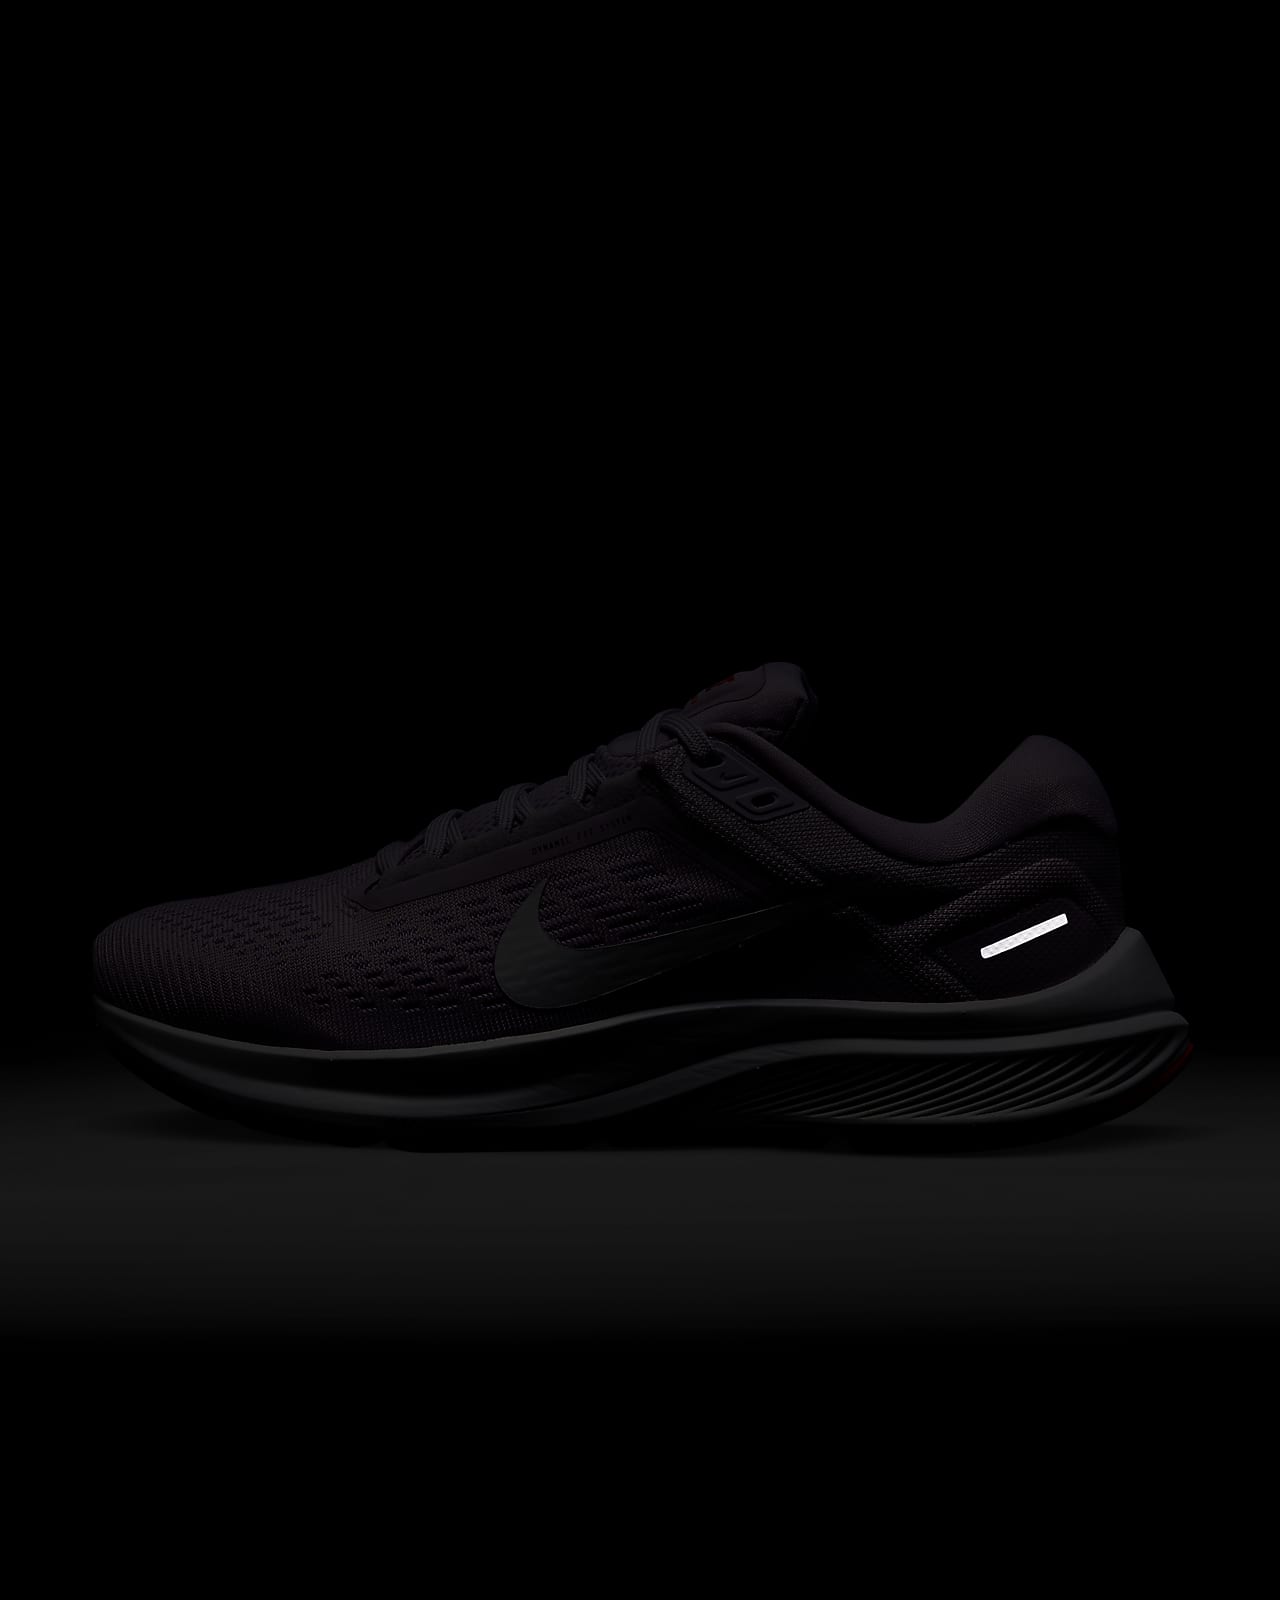 Imperio Asistencia Señor Nike Structure 24 Women's Road Running Shoes. Nike.com